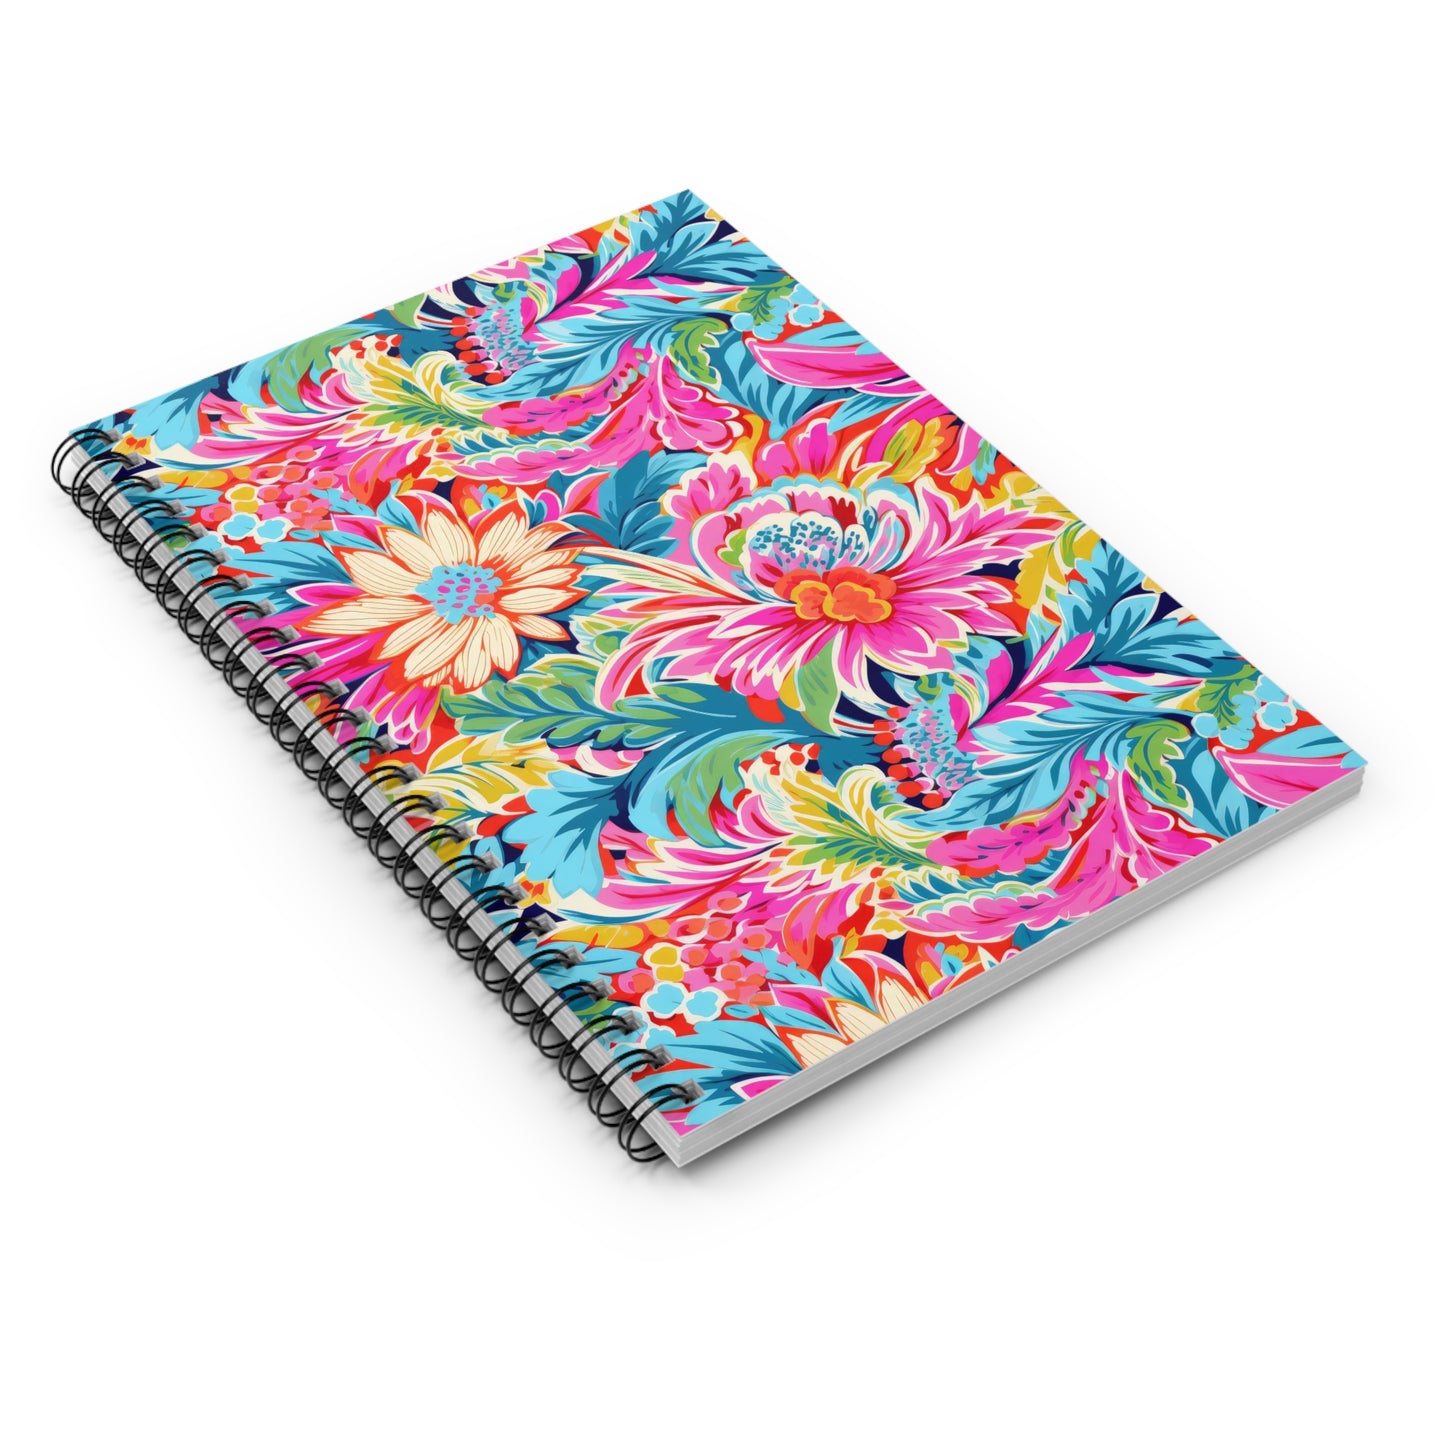 Coastal Summer Blooms: Bright Floral Watercolors in Coastal Hues Spiral Ruled Line Notebook